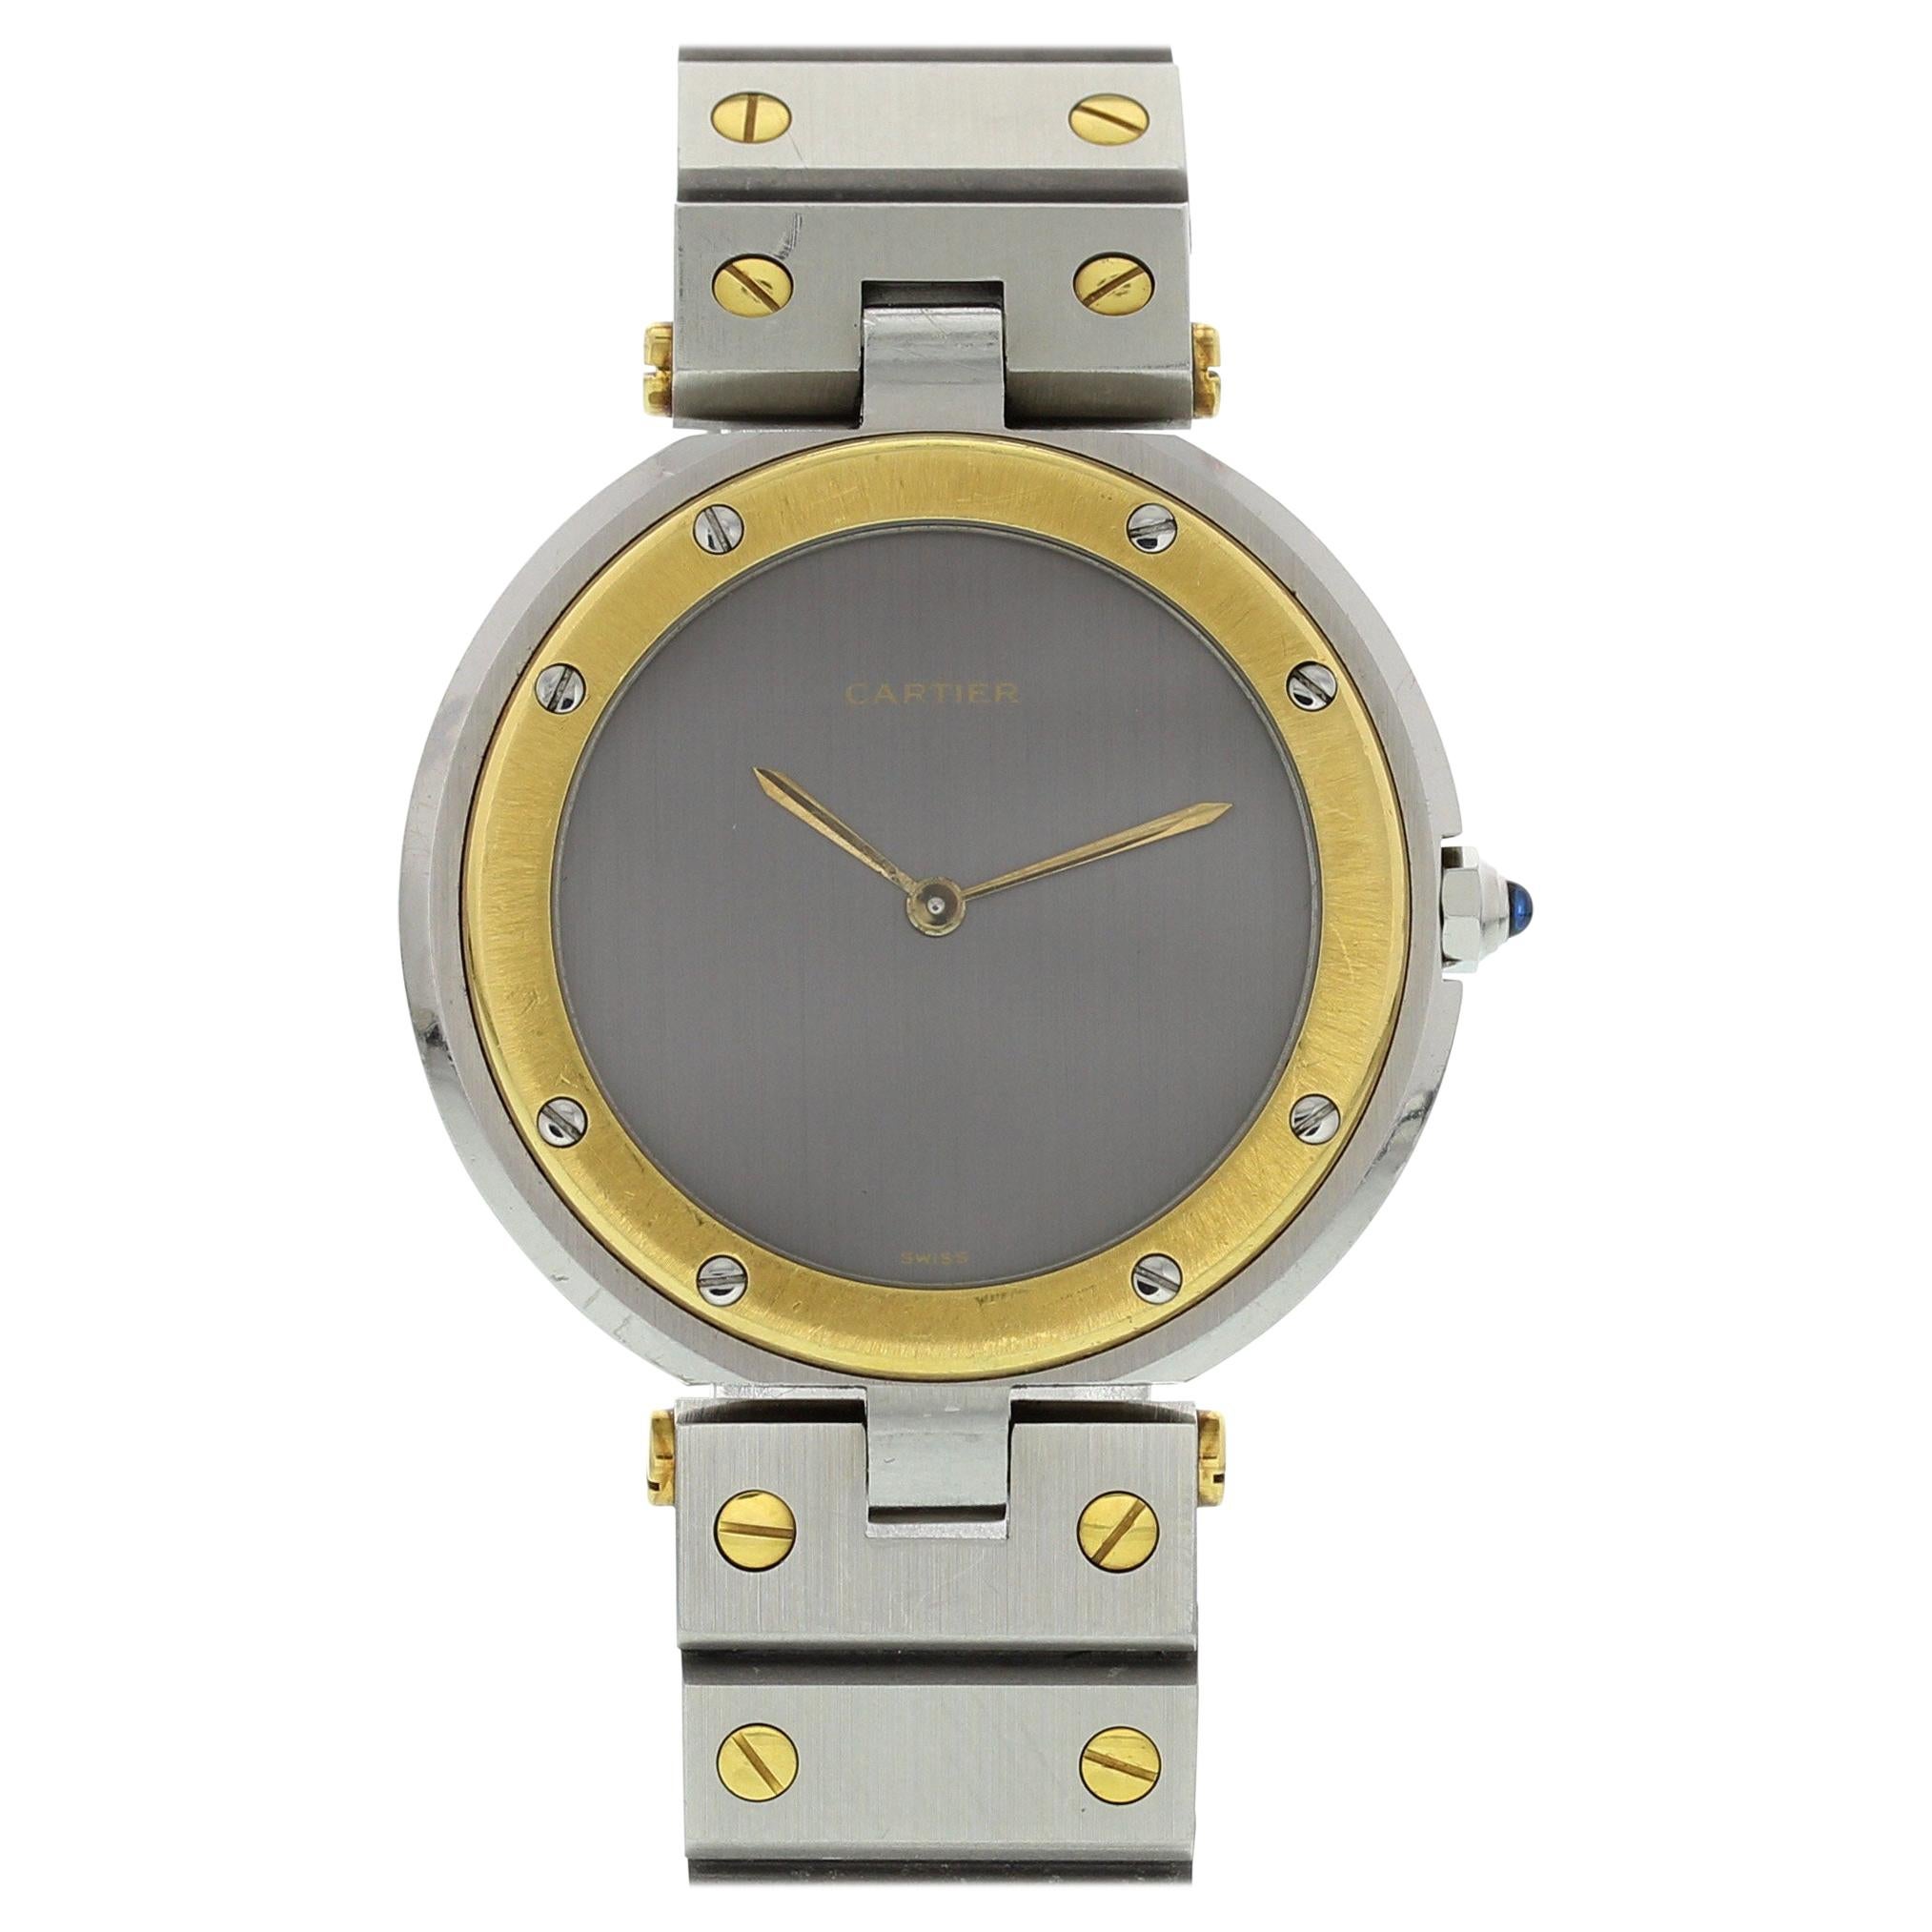 Cartier Santos Ronde 18 Karat Yellow Gold and Stainless Steel For Sale